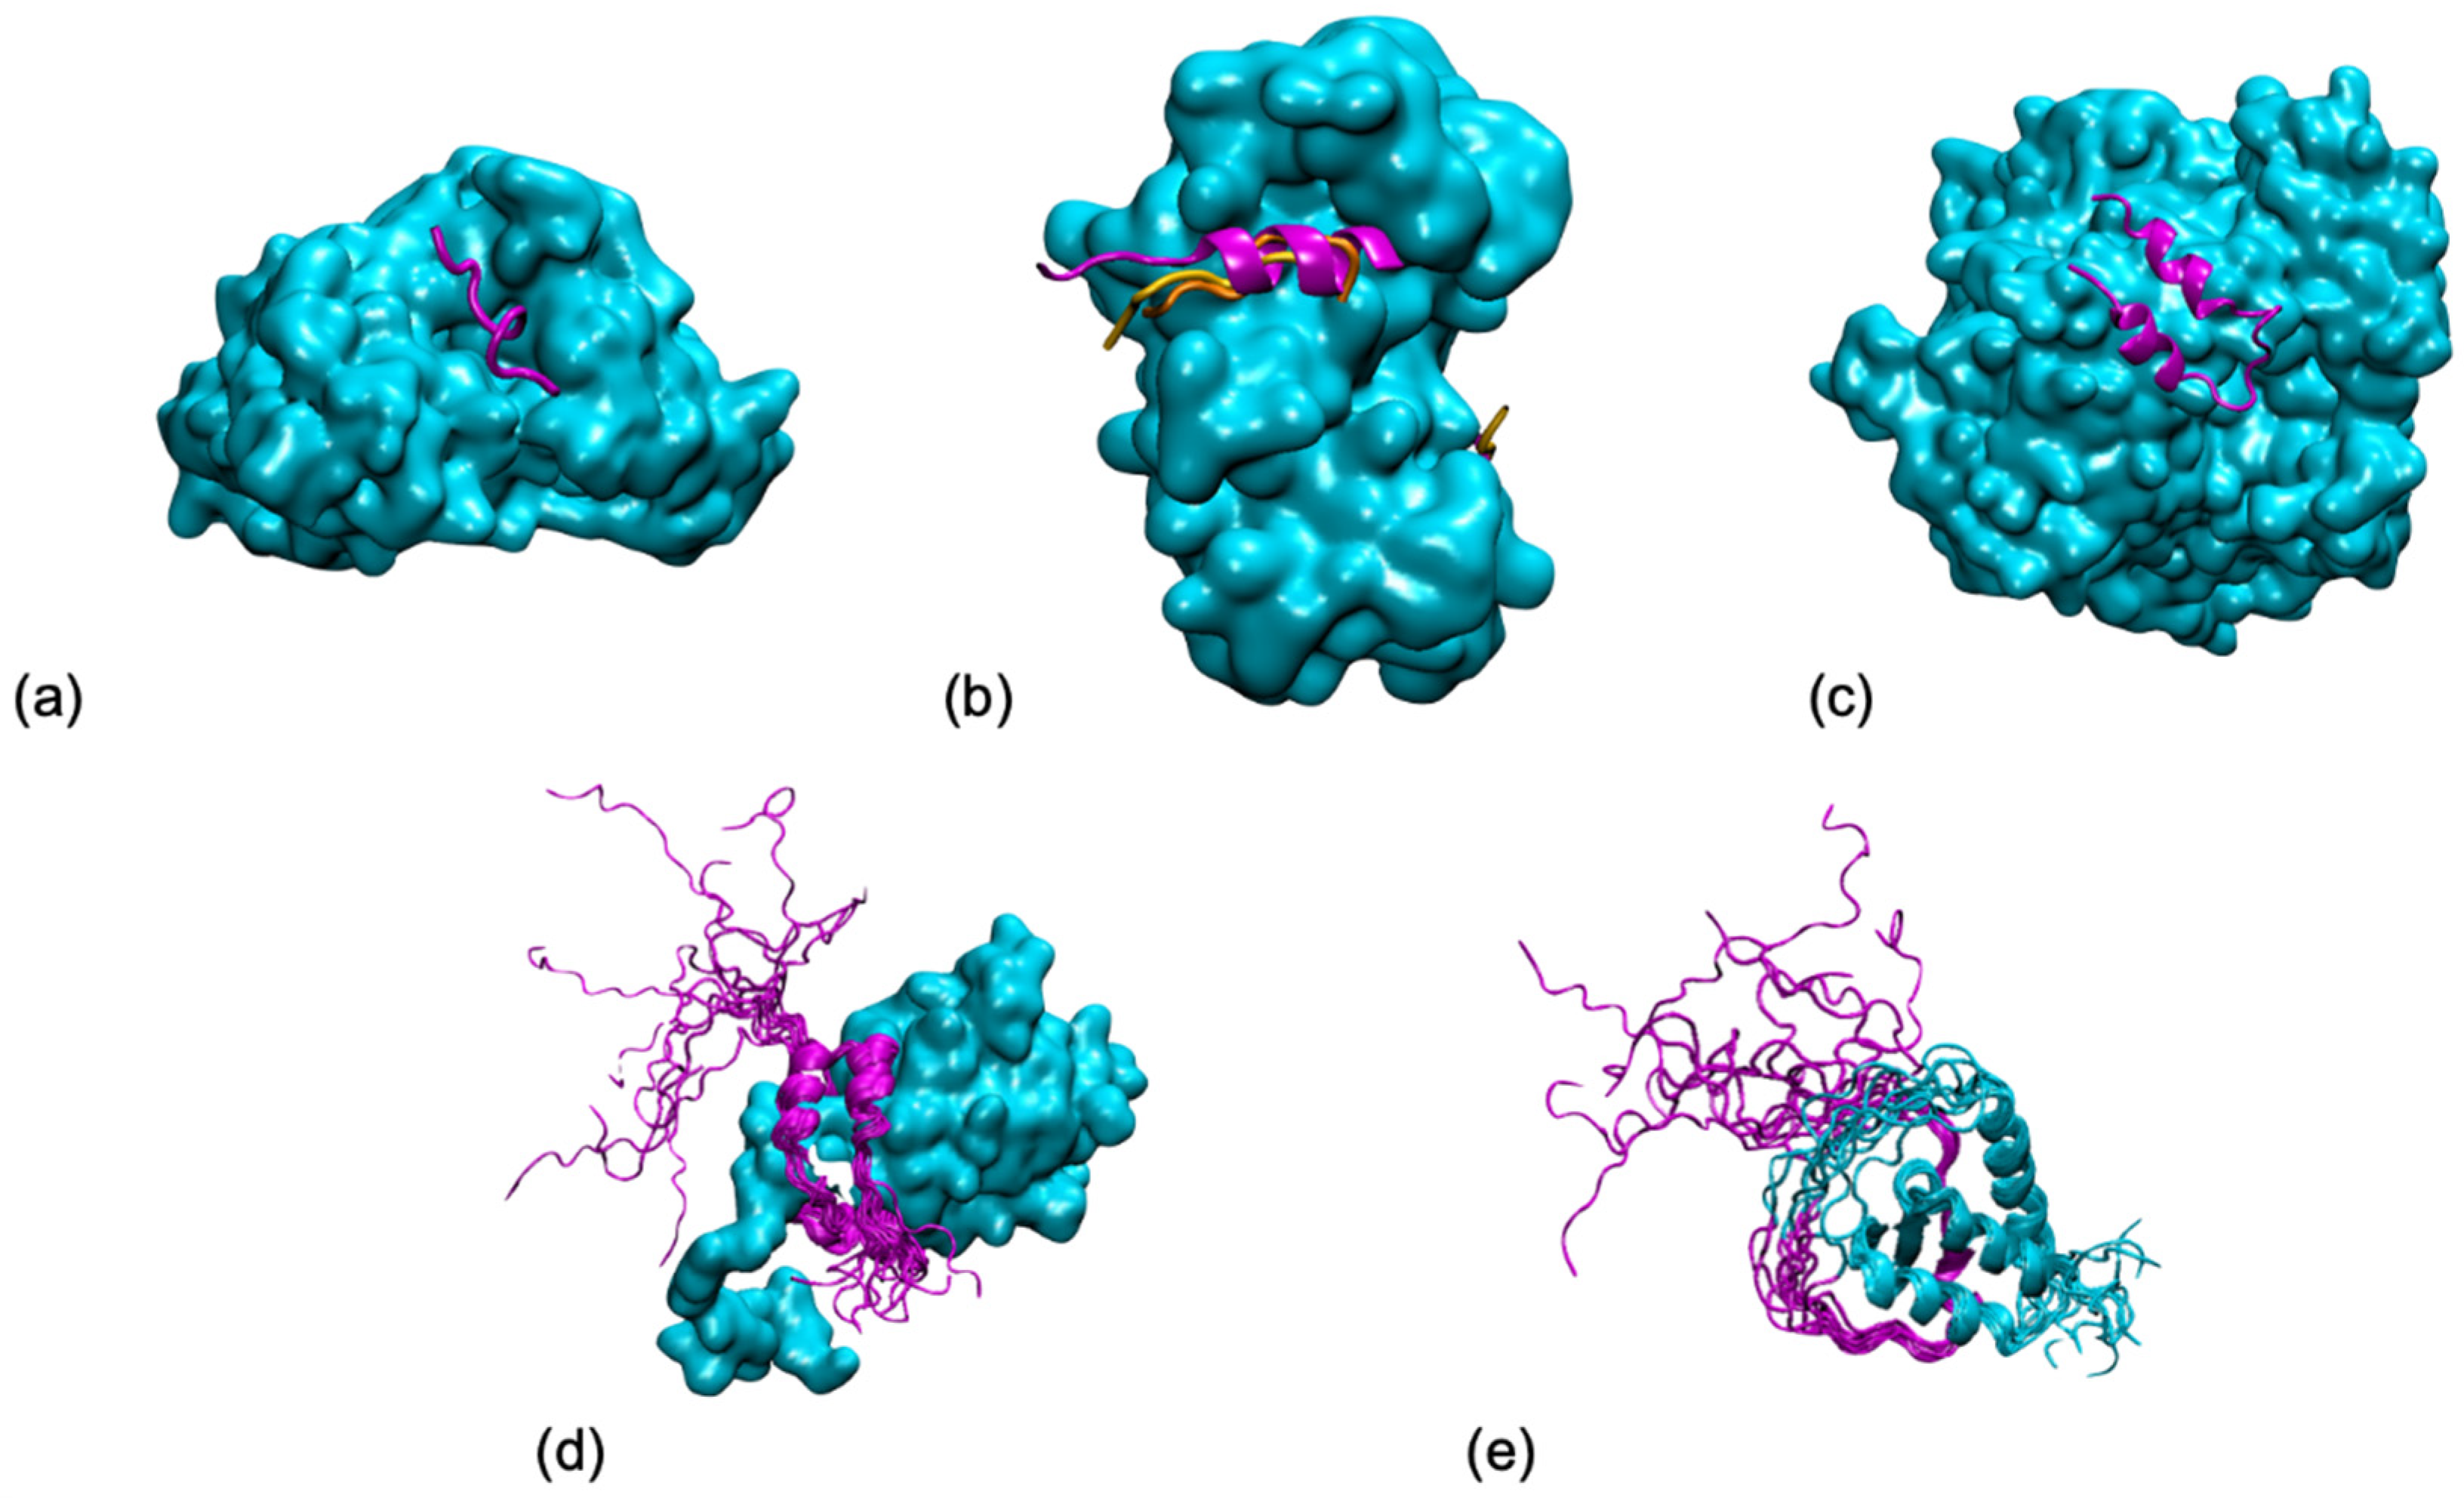 Biomolecules | Free Full-Text | Order Meets Disorder: Modeling and Function of the Protein Interface in Fuzzy Complexes | HTML